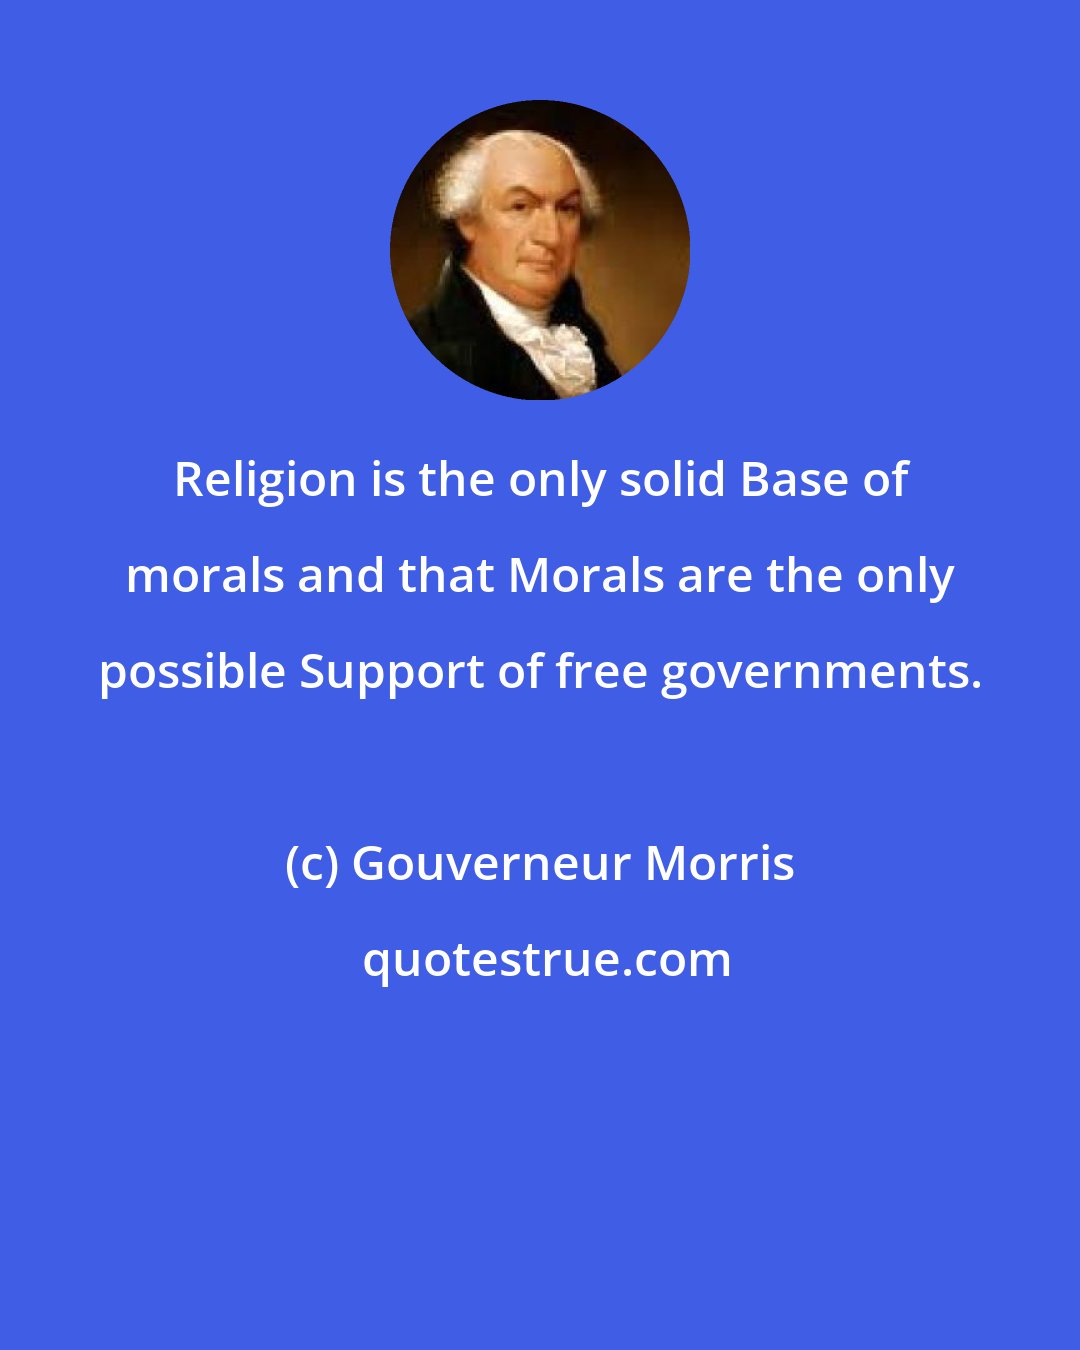 Gouverneur Morris: Religion is the only solid Base of morals and that Morals are the only possible Support of free governments.